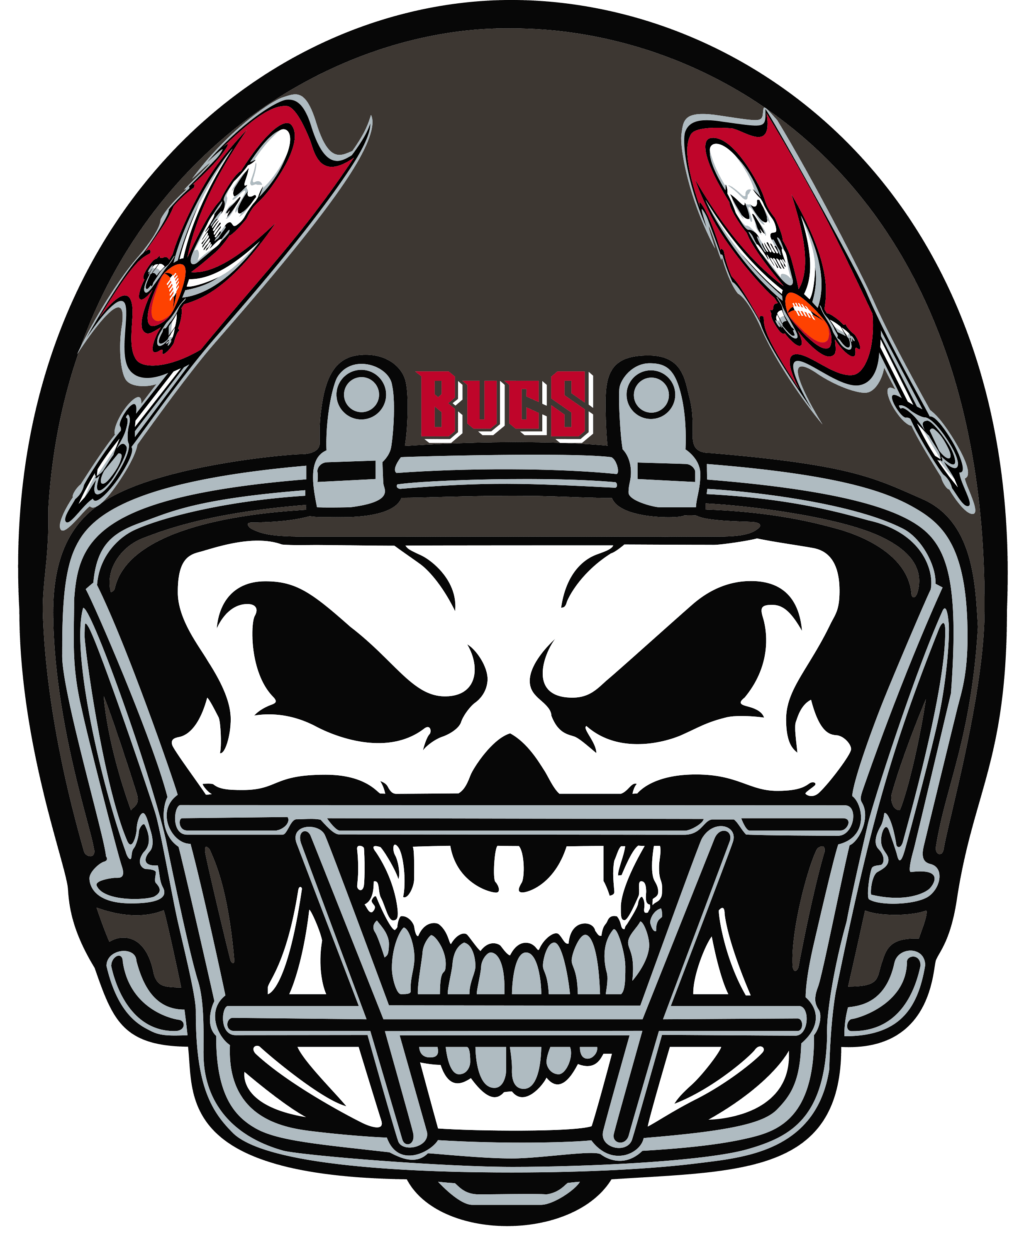 tampa bay buccaneers 15 NFL Logo Tampa Bay Buccaneers, Tampa Bay Buccaneers SVG, Vector Tampa Bay Buccaneers Clipart Tampa Bay Buccaneers American Football Kit Tampa Bay Buccaneers, SVG, DXF, PNG, American Football Logo Vector Tampa Bay Buccaneers EPS download NFL-files for silhouette, Tampa Bay Buccaneers files for clipping.